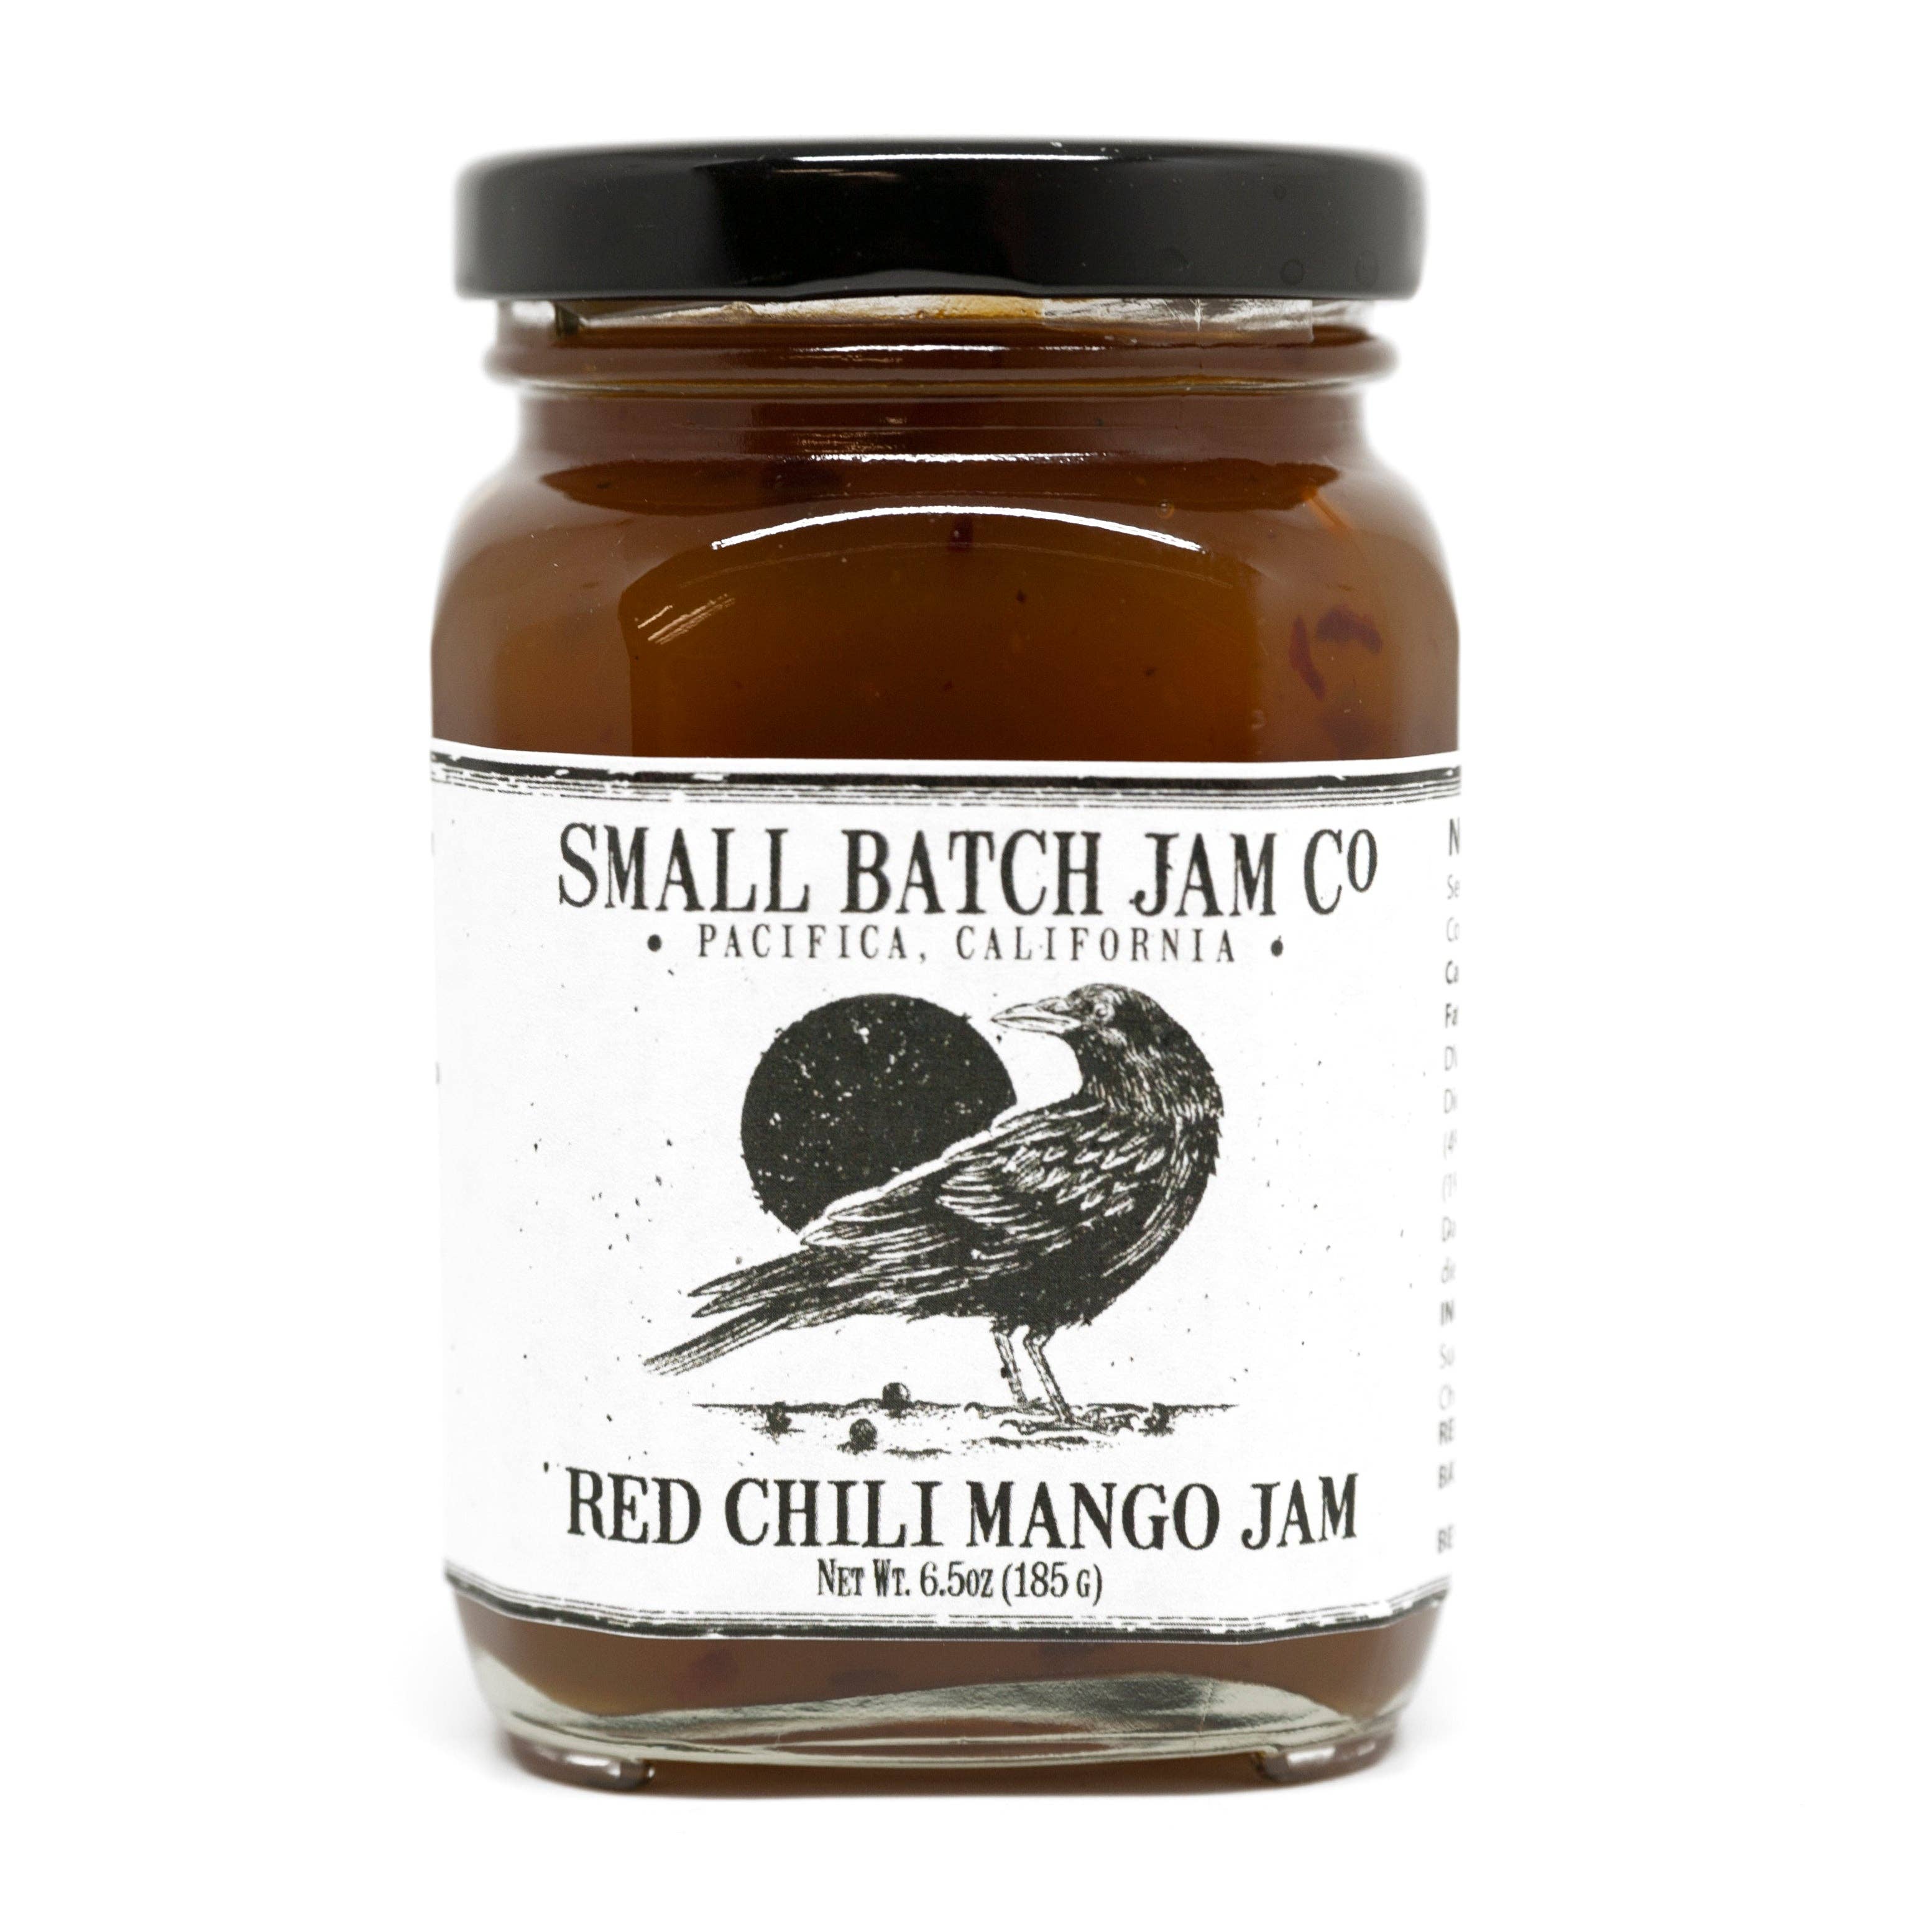 Small Batch Jam Co. wholesale products